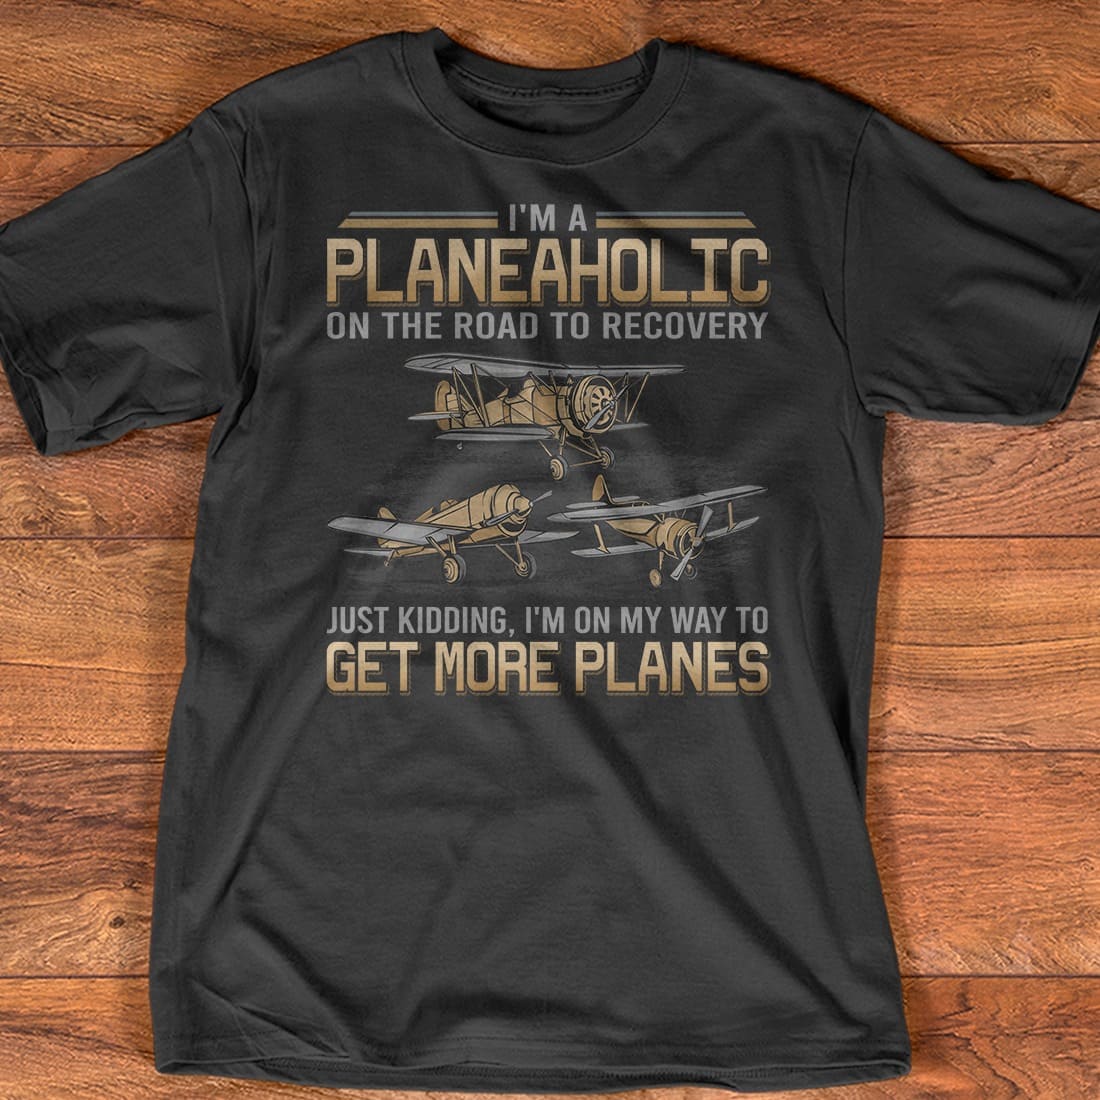 Plane Graphic T-shirt - I'm a planeaholic on the road to recovery just kidding i'm on my way to get more planes